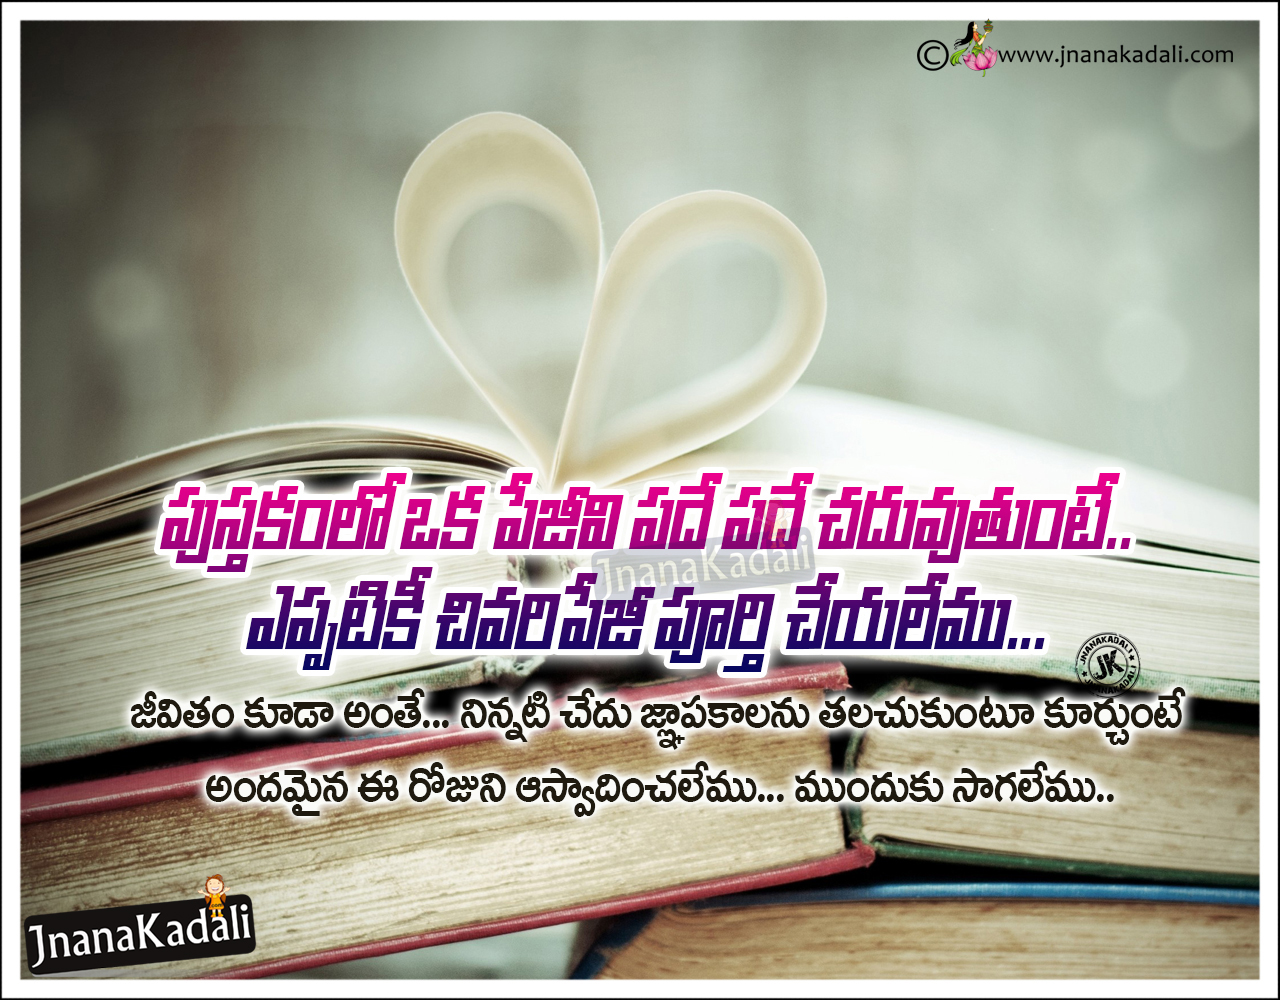 Life Quotes in Telugu Self Motivational Success Thoughts in Telugu Best 20 Ways to be Success Quotes in Telugu Telugu Success Messages